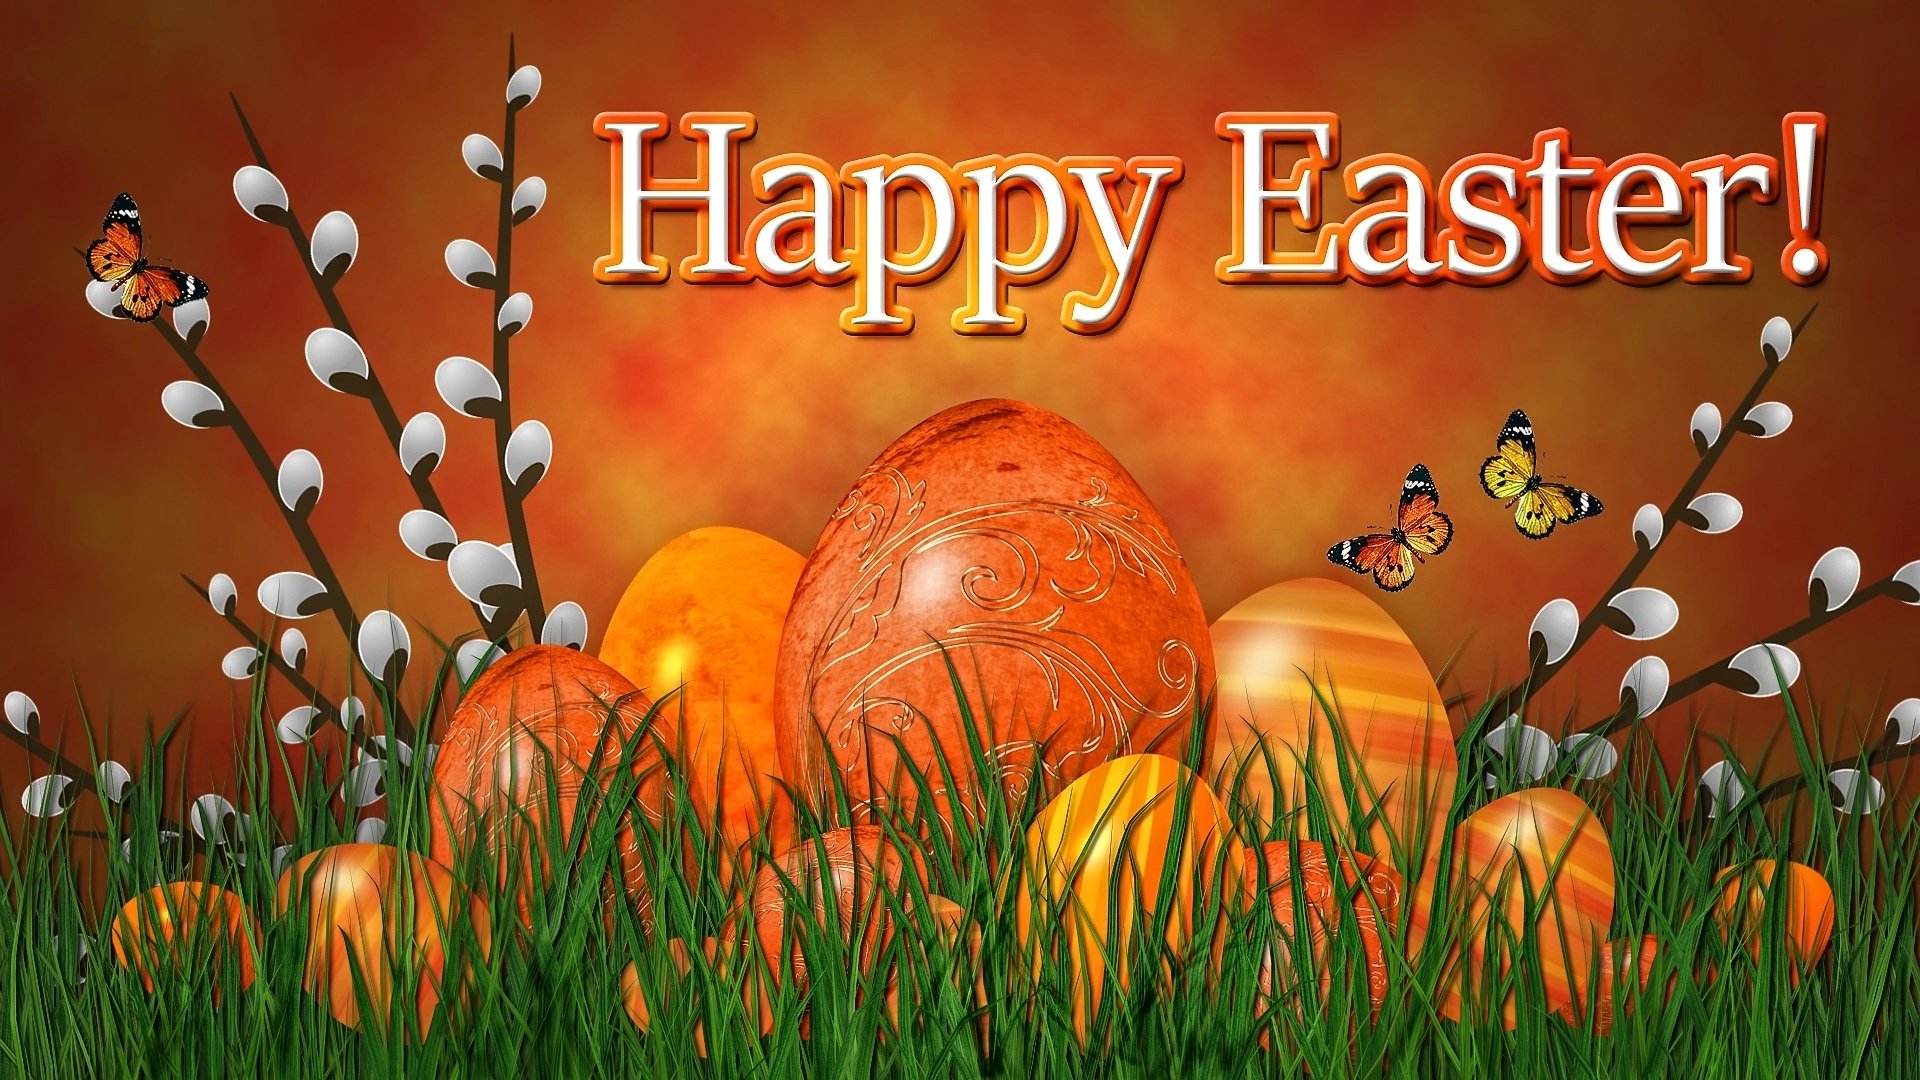 Happy Easter ! HD Wallpaper | Background Image | 1920x1080 | ID:814419 - Wallpaper Abyss